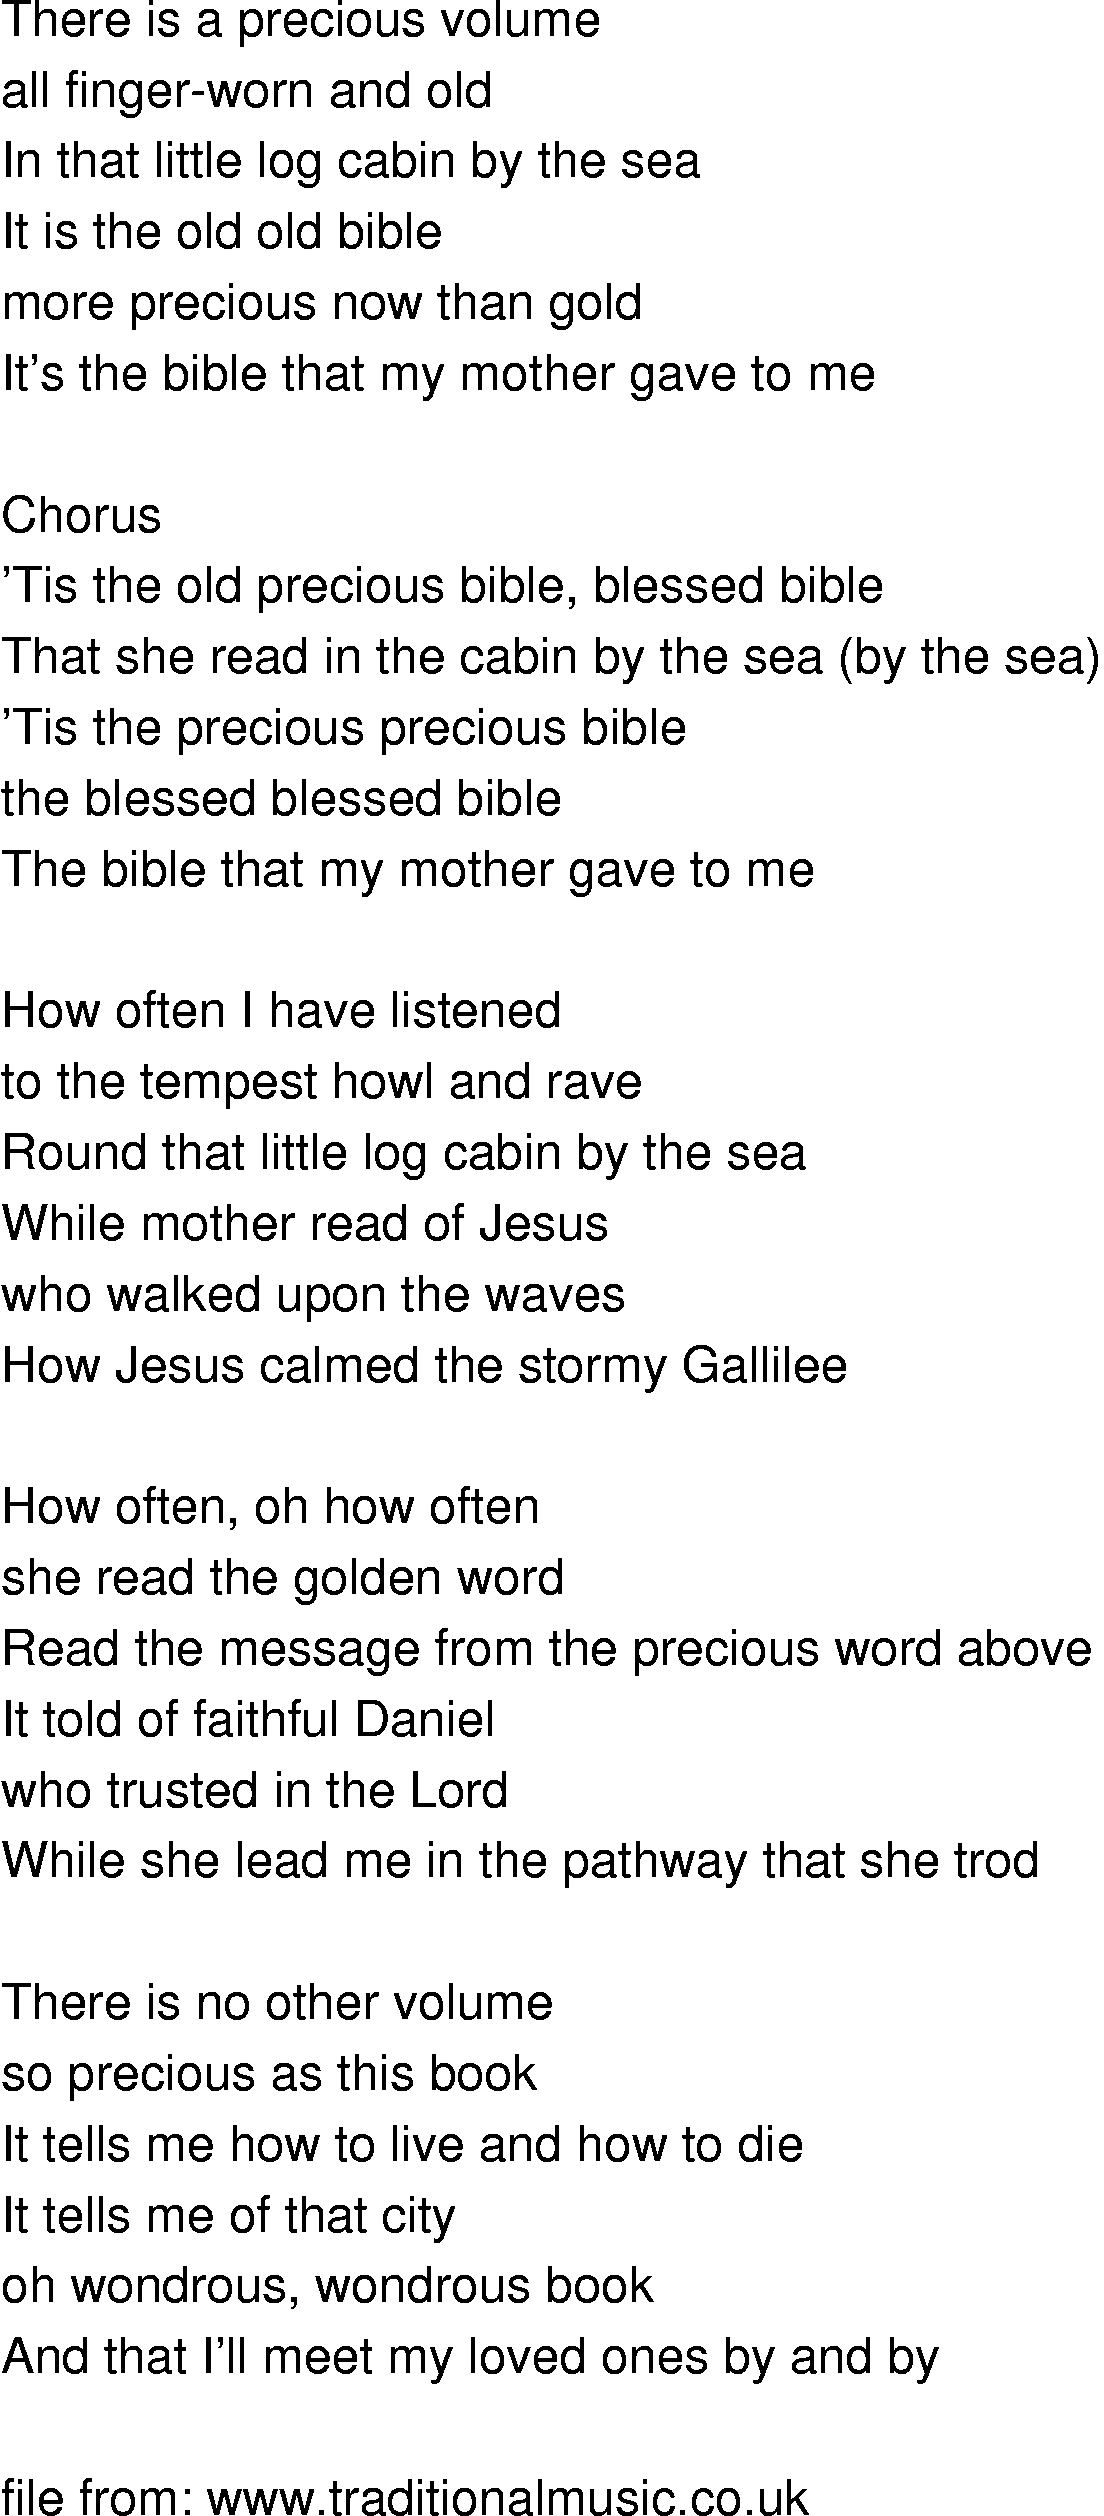 Old-Time (oldtimey) Song Lyrics - bible in the cabin by the sea